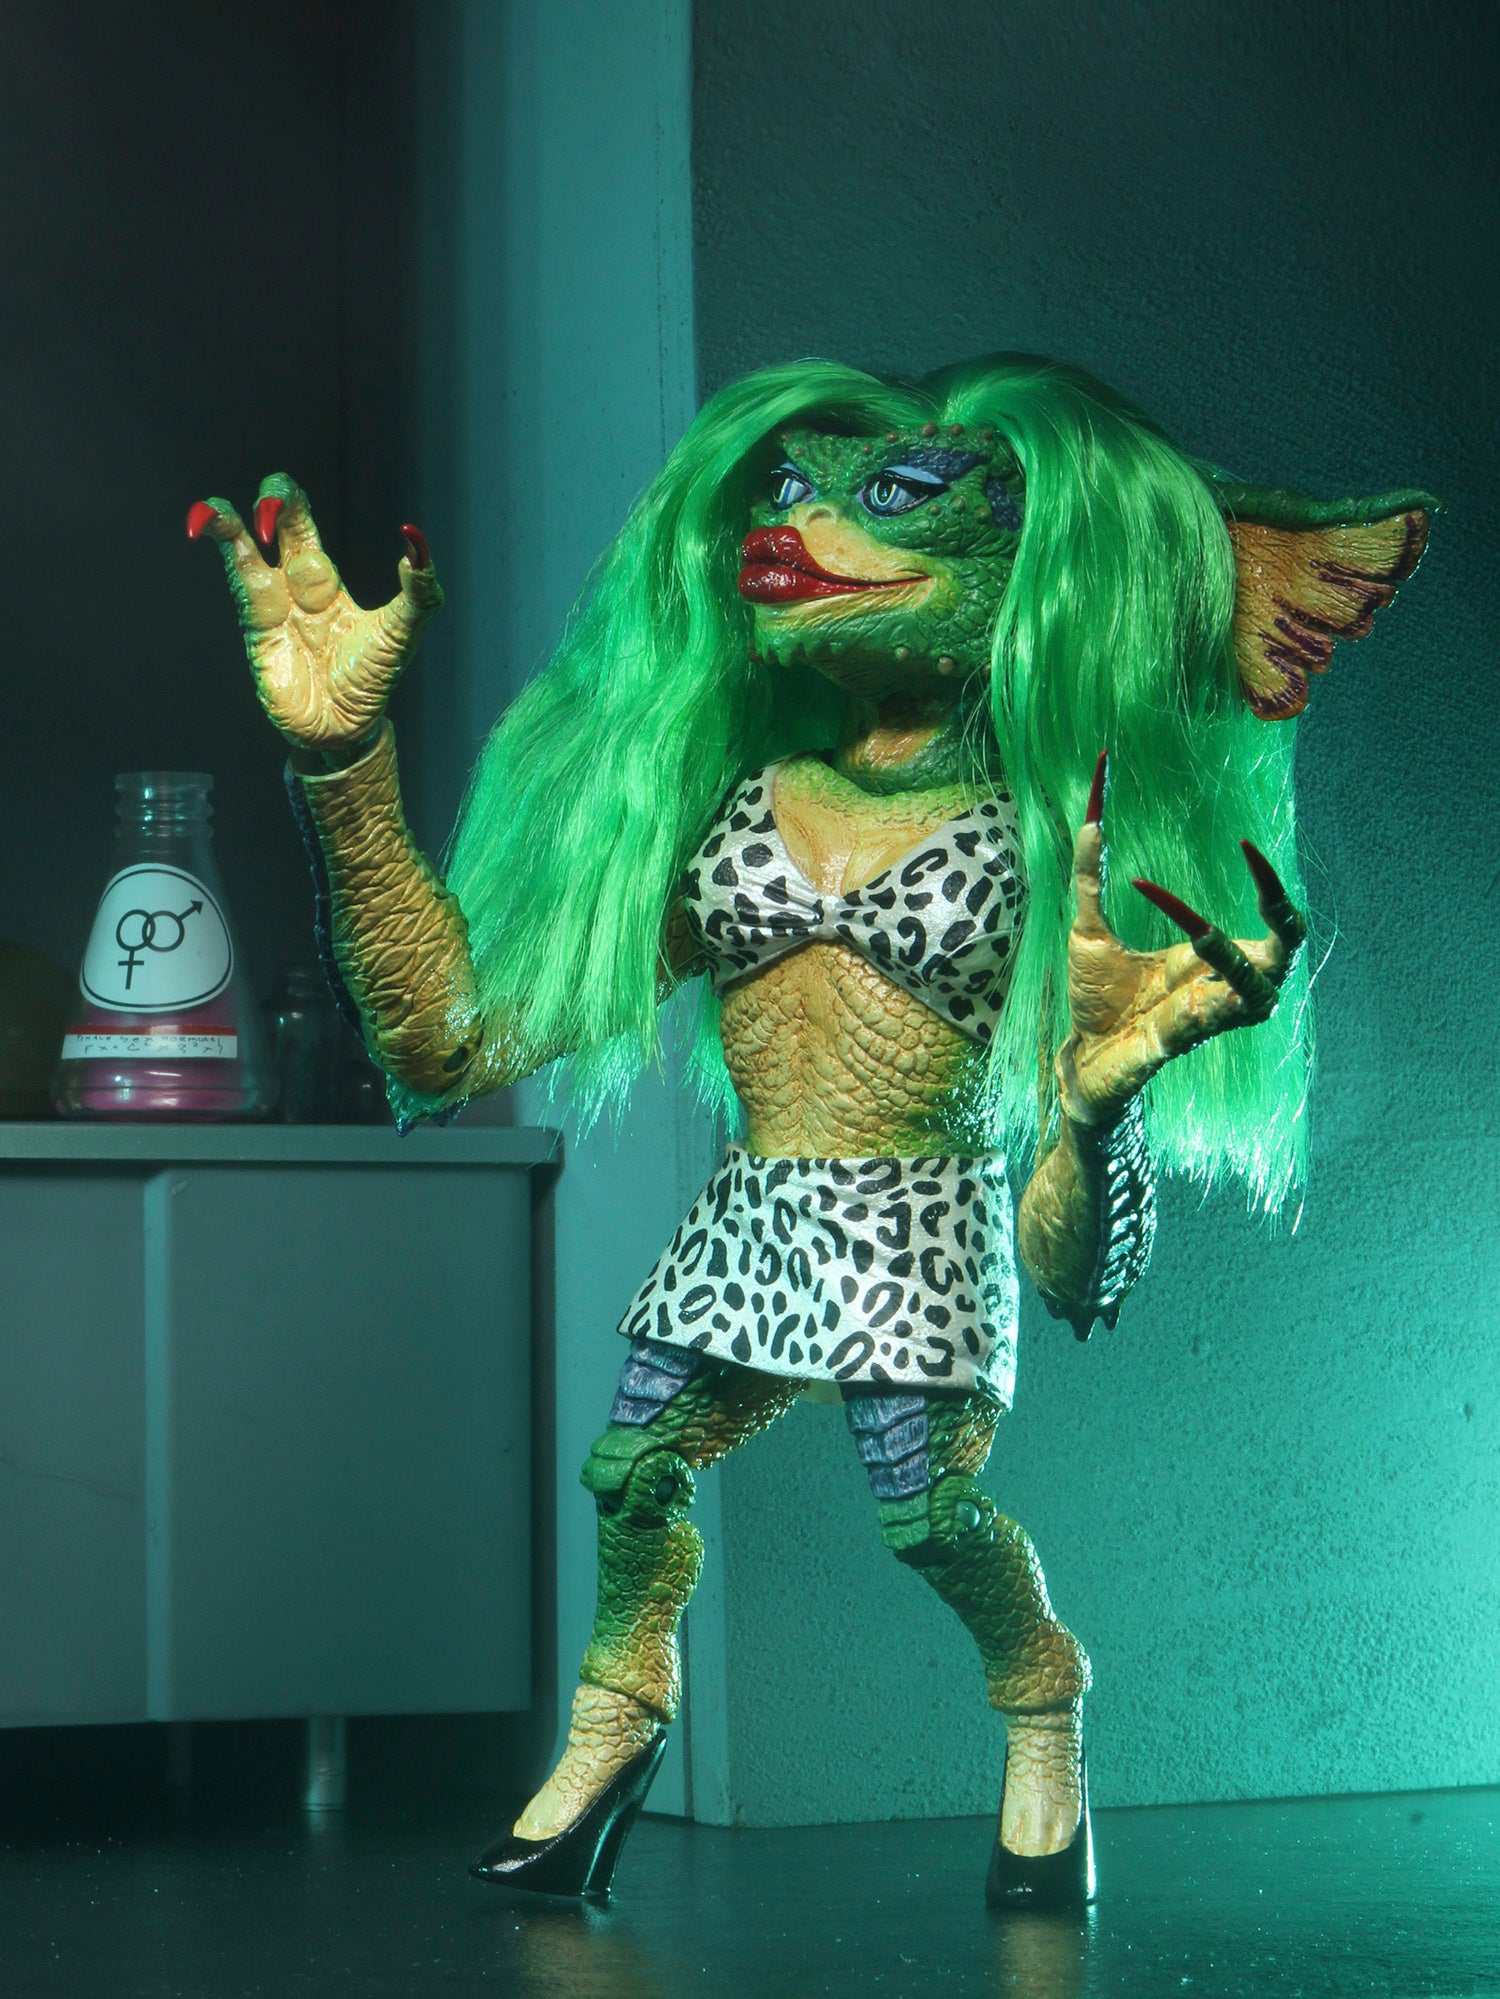 NECA - Gremlins 2 - The New Batch - 7" Scale Action Figure - Ultimate Greta - costumes.com